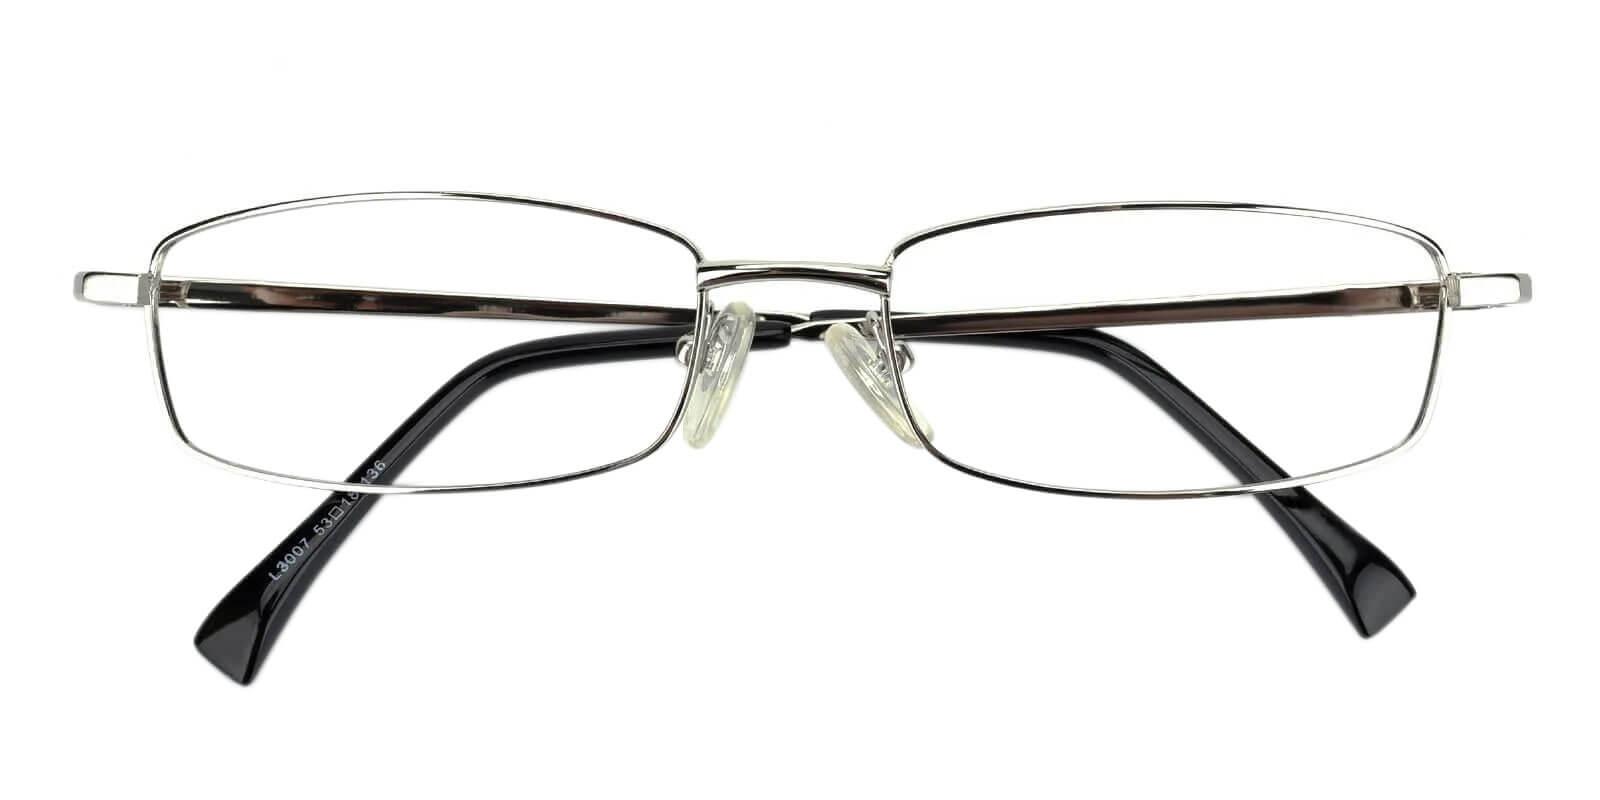 Curie Silver Metal Eyeglasses , NosePads Frames from ABBE Glasses